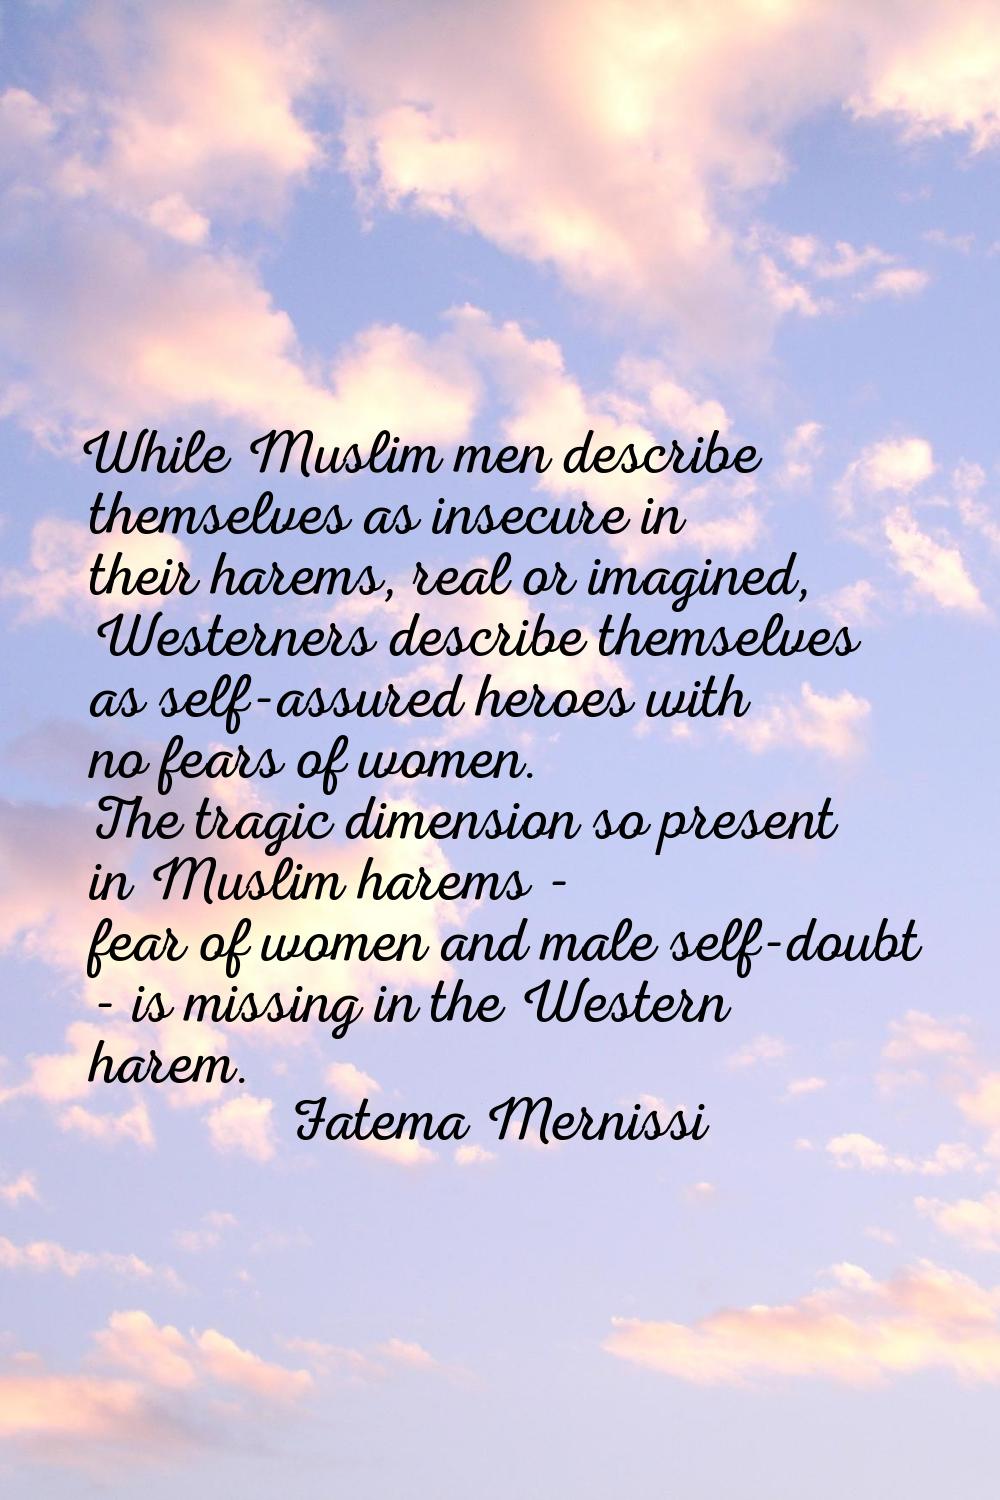 While Muslim men describe themselves as insecure in their harems, real or imagined, Westerners desc